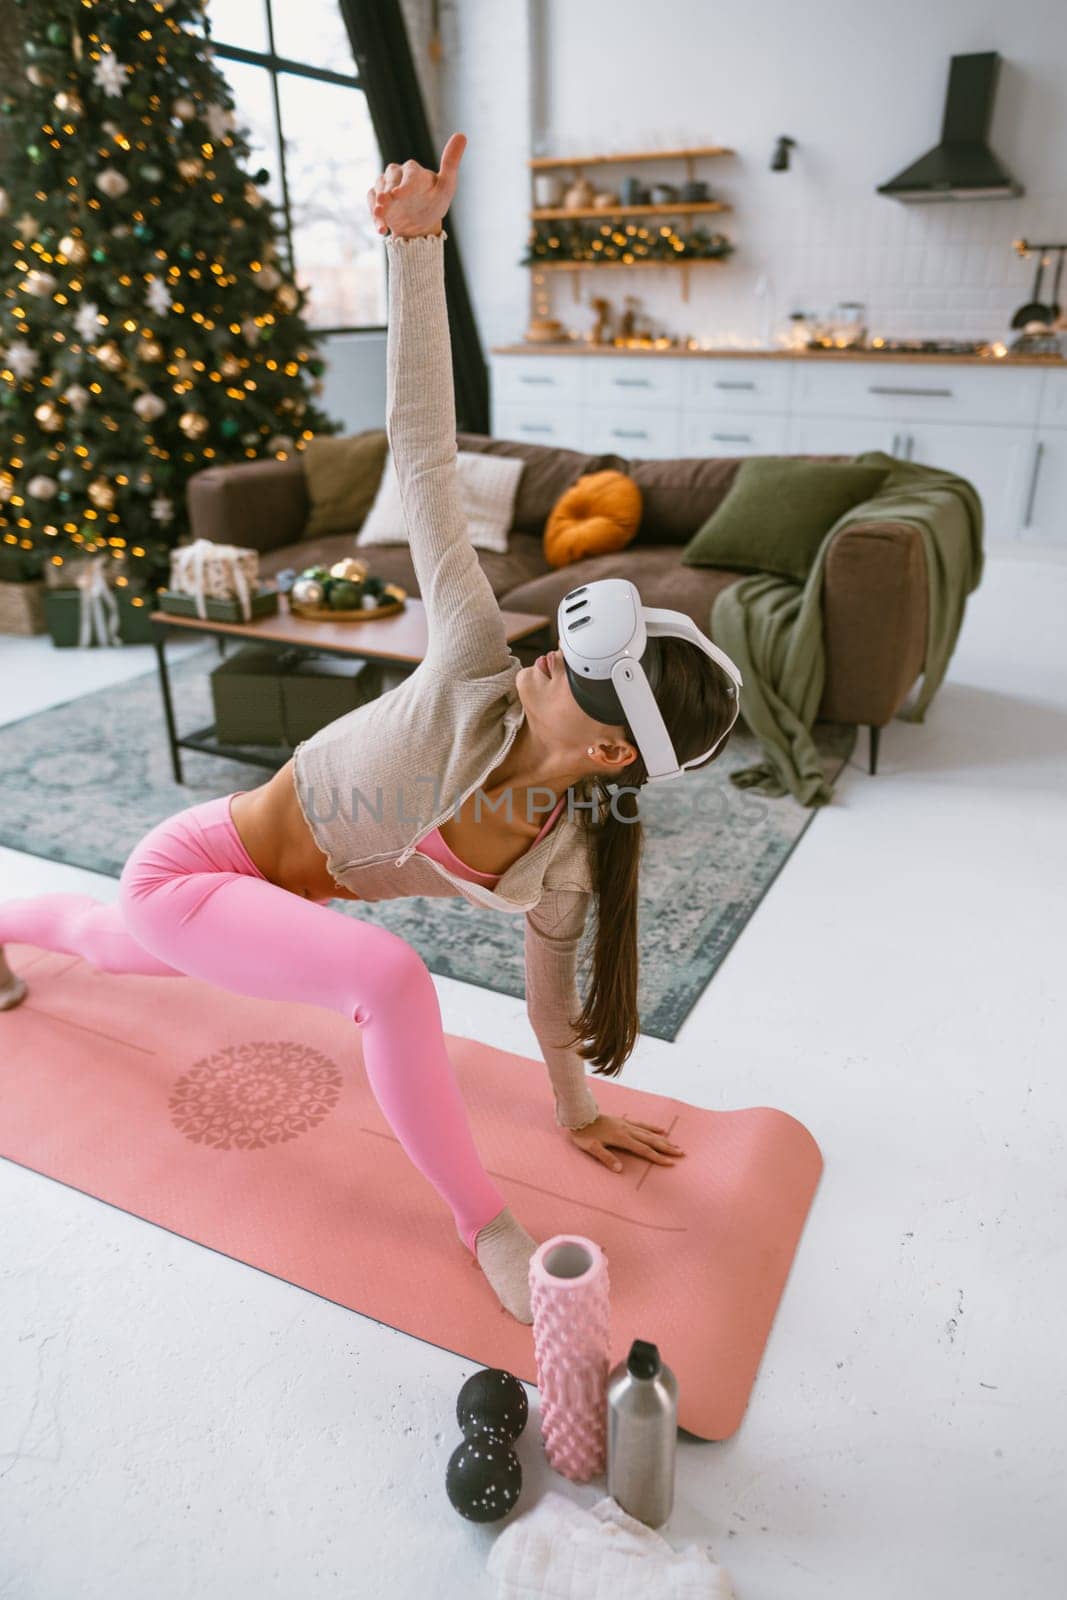 Wearing workout clothes and a virtual reality headset, the fashionable young woman engages in yoga exercises next to a Christmas tree. by teksomolika